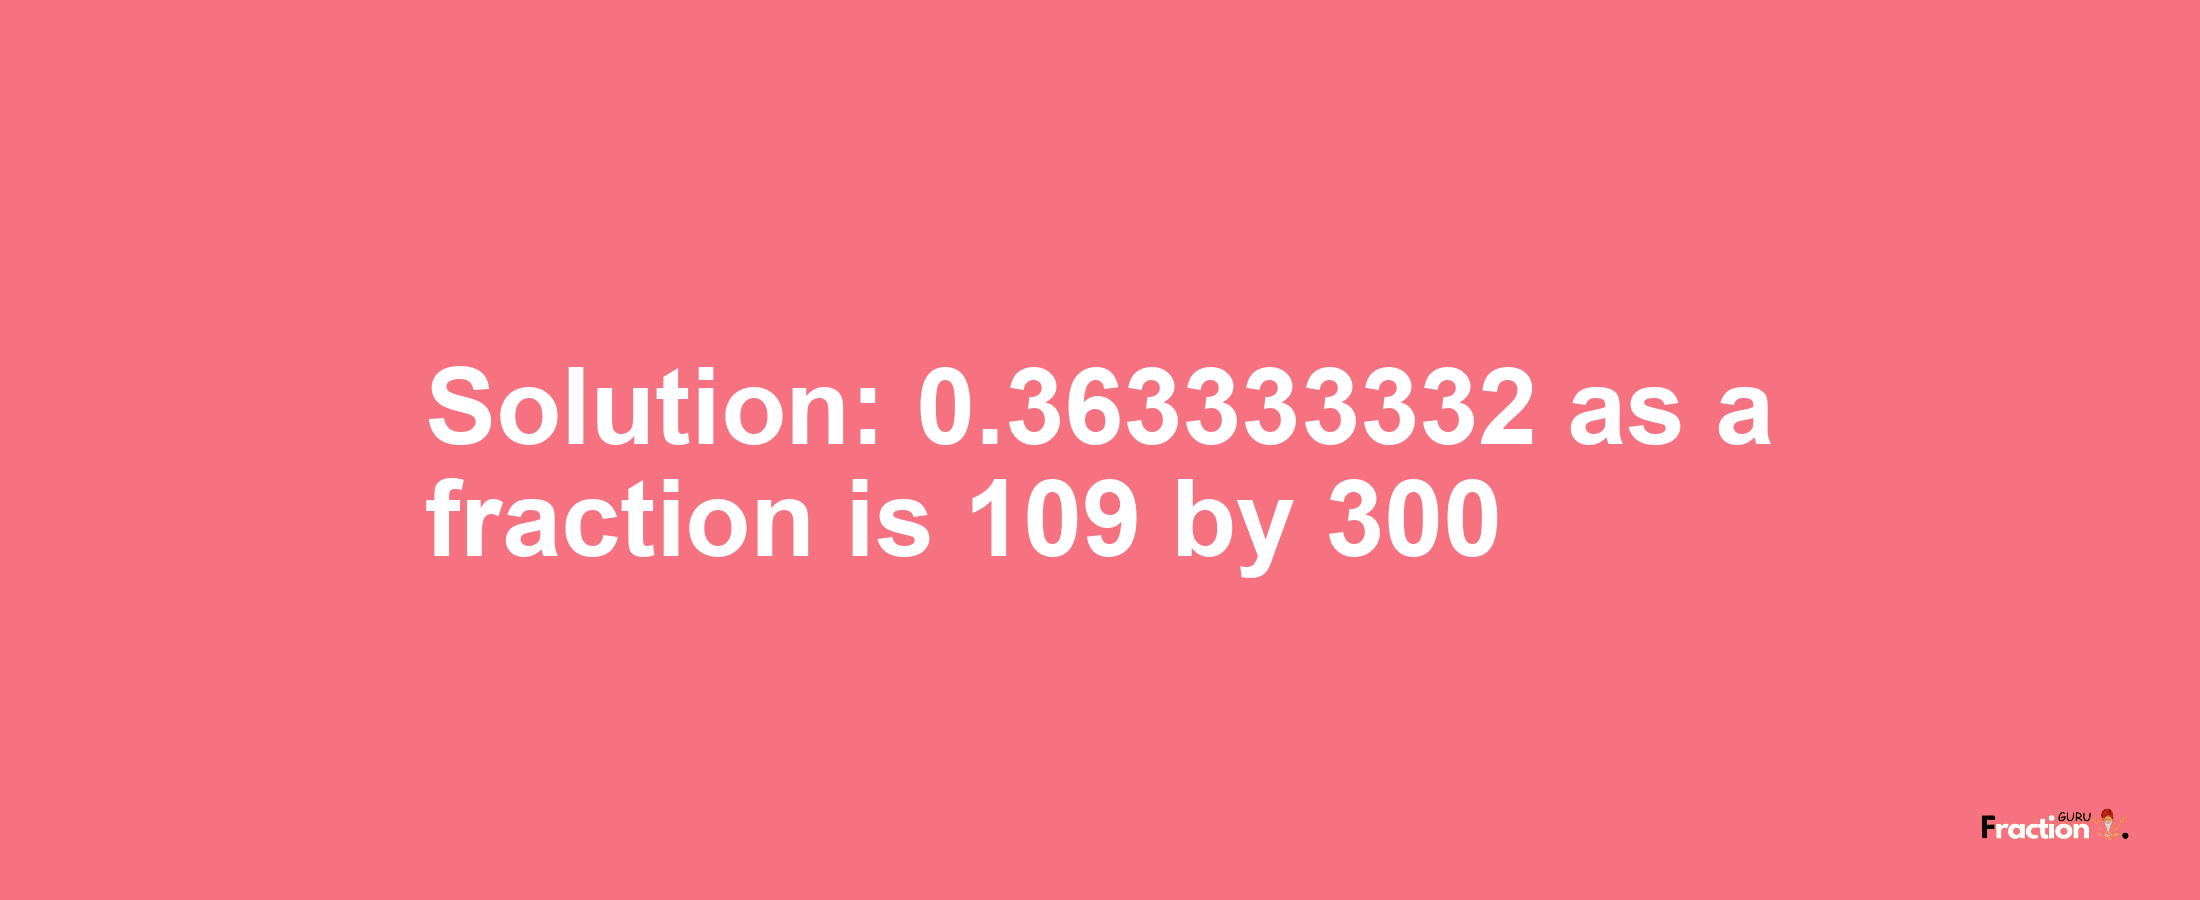 Solution:0.363333332 as a fraction is 109/300